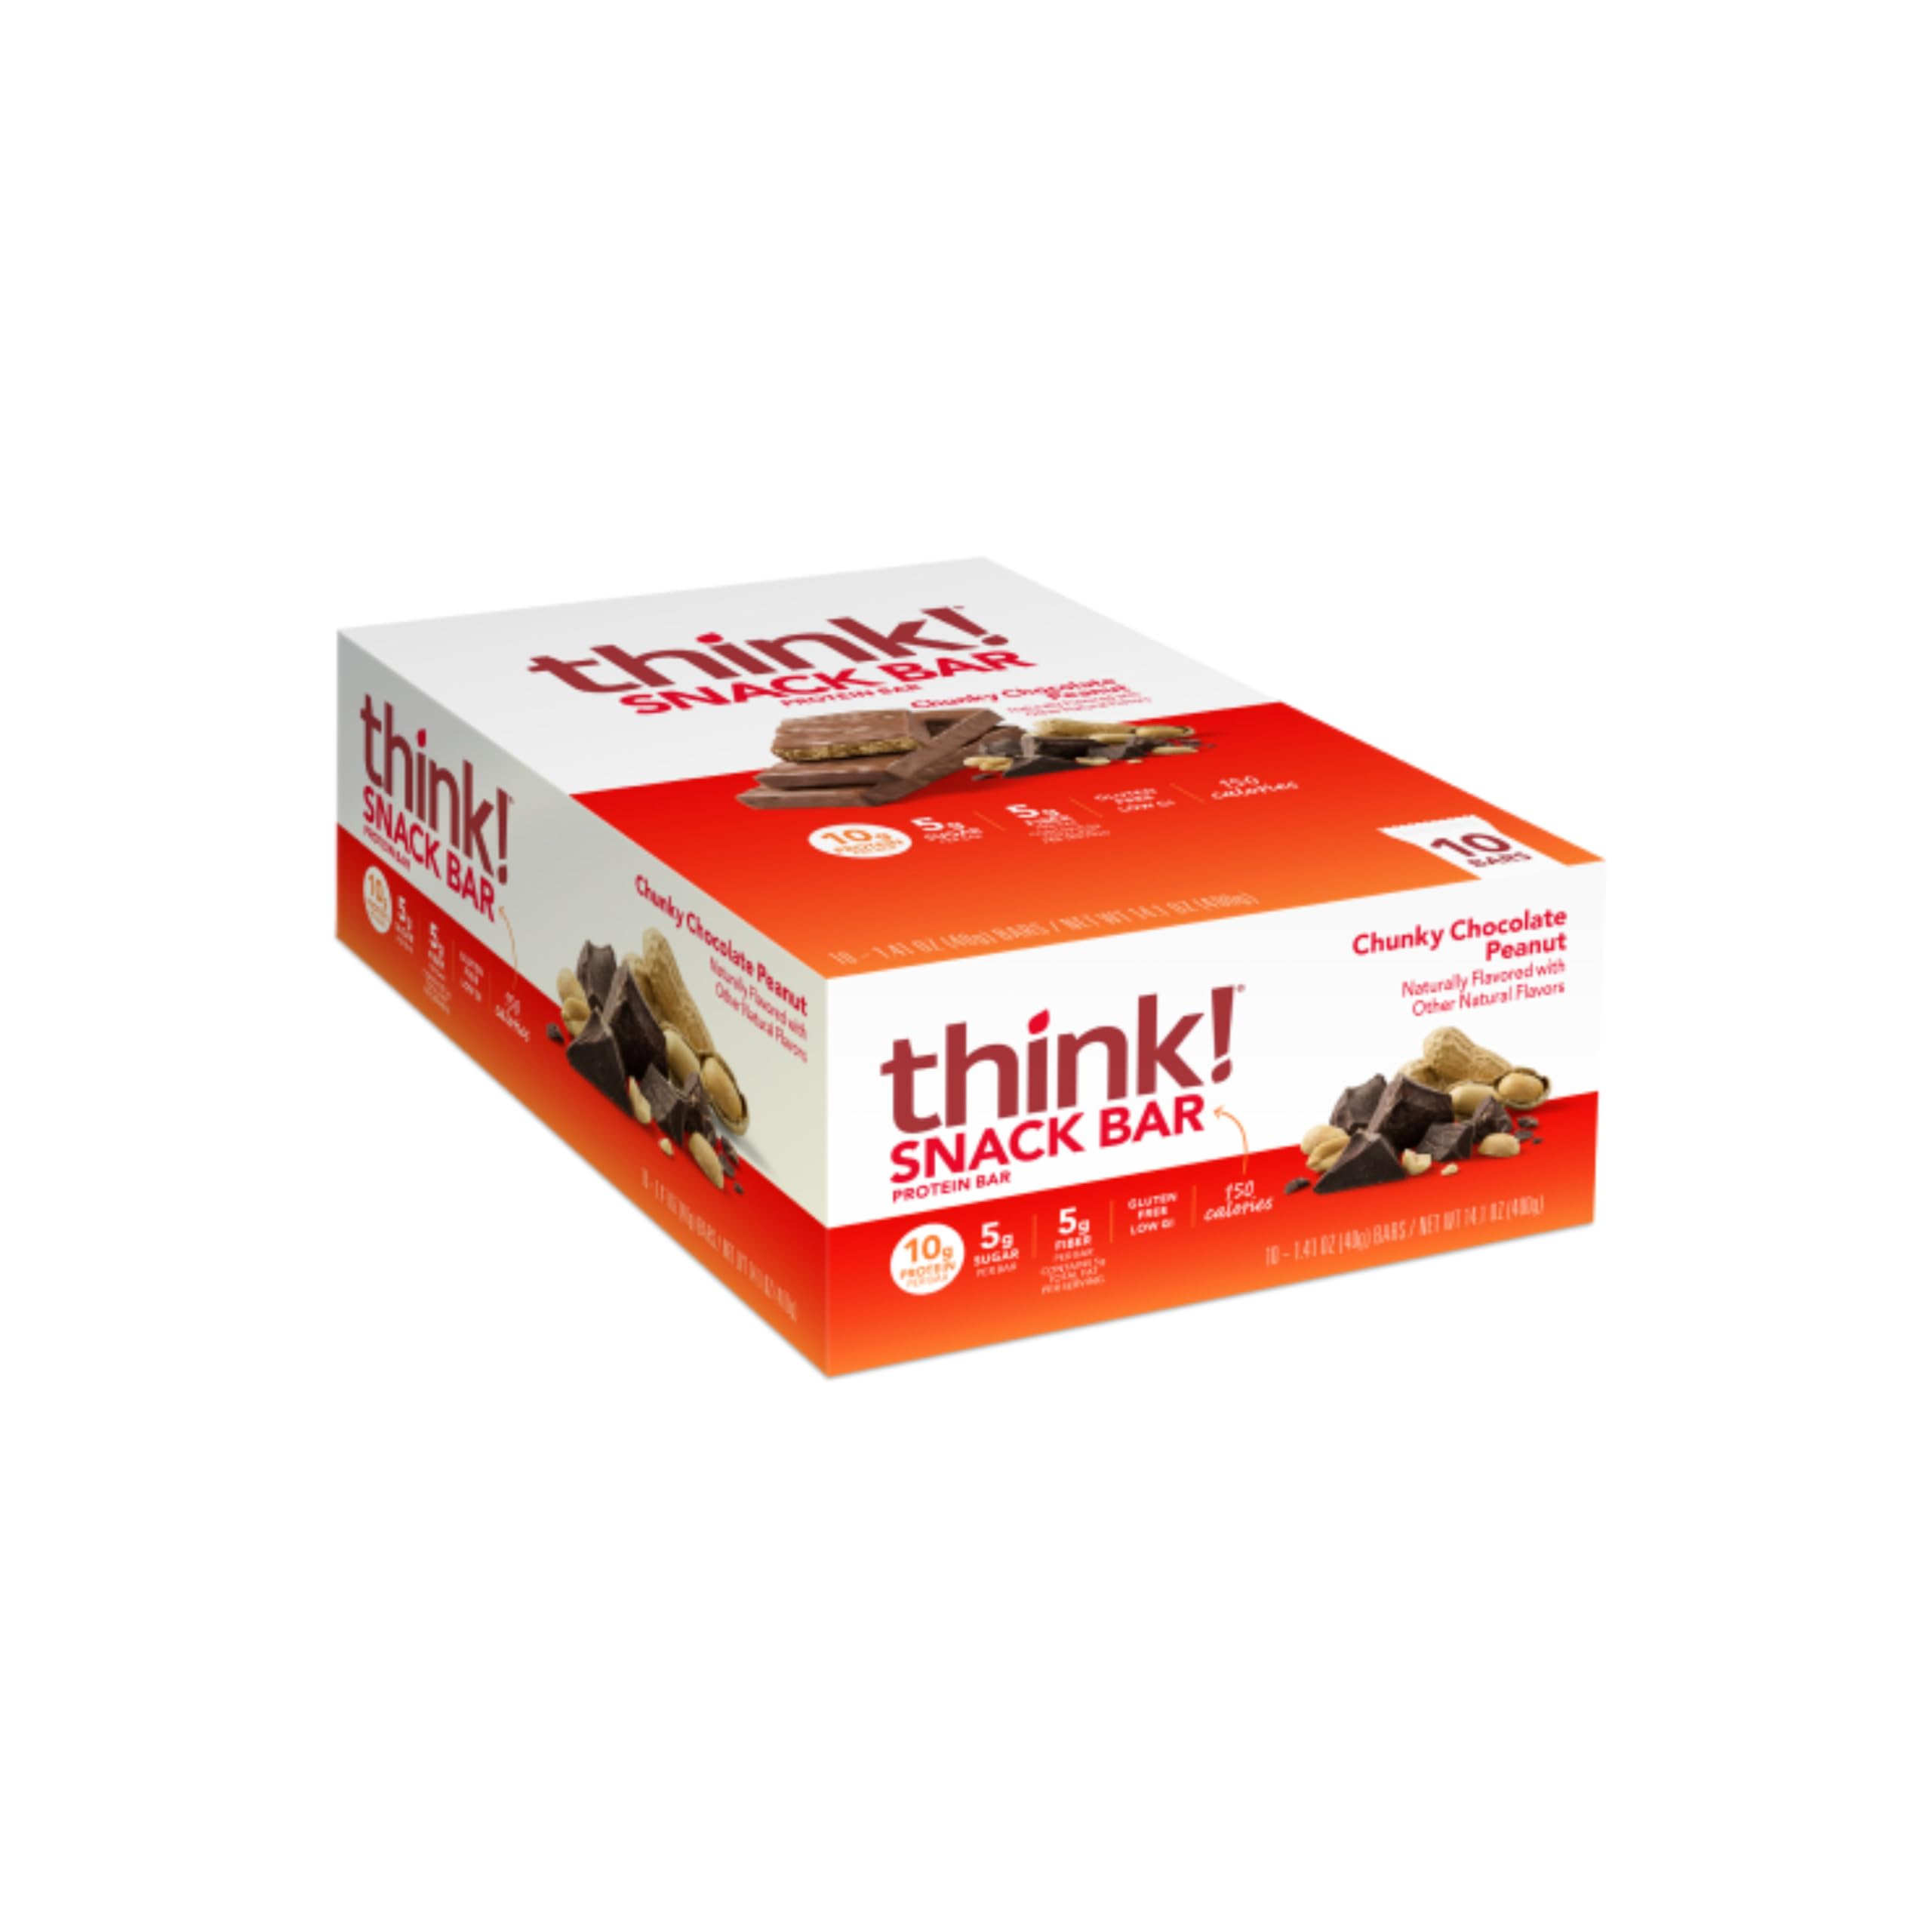 10-Count 1.41-Oz think! Protein Bars (Chunky Chocolate Peanut) $7.05 w/ S&S + Shipping is free w/ Prime or on 35+